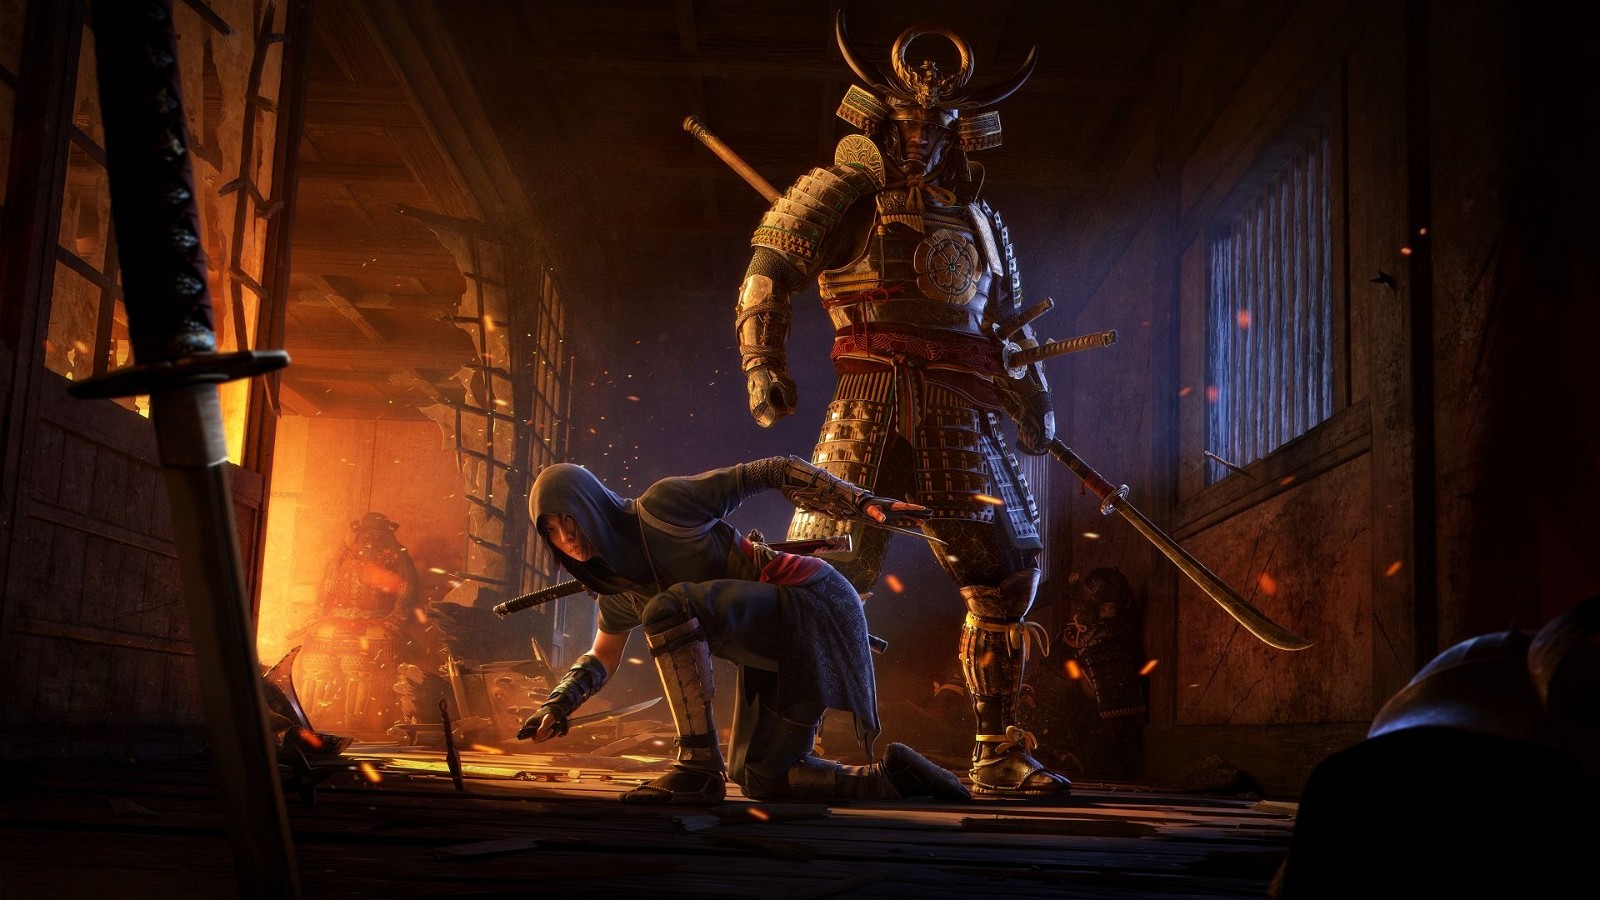 The tale of two characters is going to be Ubisoft's way of trying new things with the franchise. Image Credit: Ubisoft.